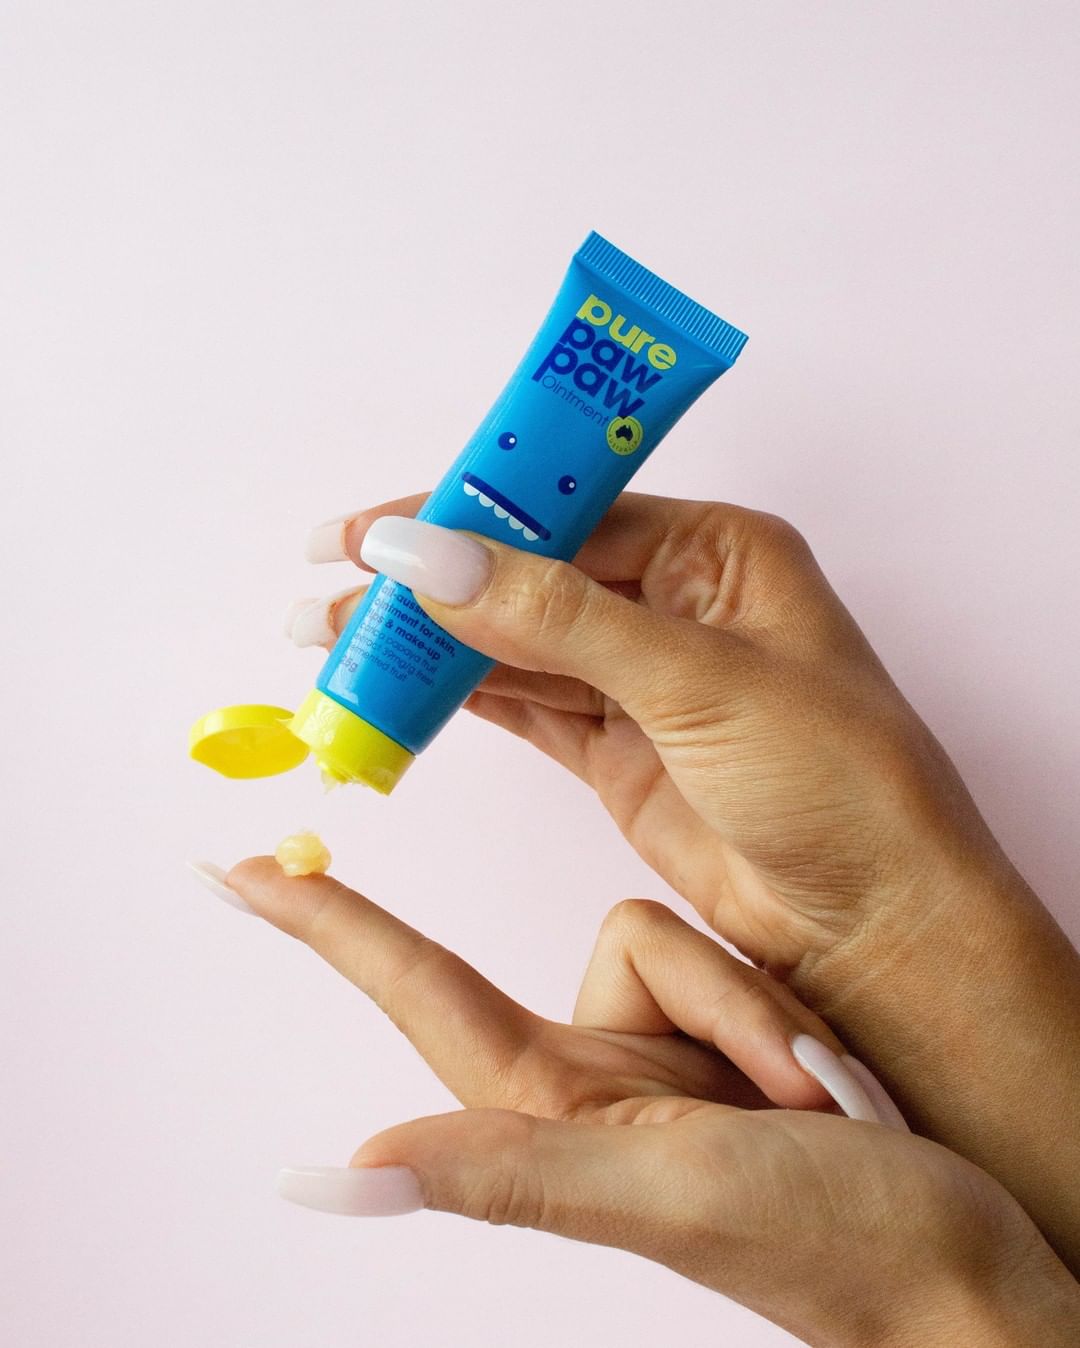 Pure Paw Paw - One little squeeze - all the fixes. 🕺🏼⠀⠀⠀⠀⠀⠀⠀⠀⠀
#purepawpaw #lipservice #allrounder #beautymusthave #beautyointment #fruityflavours #cultbeauty #lipglossaddict #mrfixit